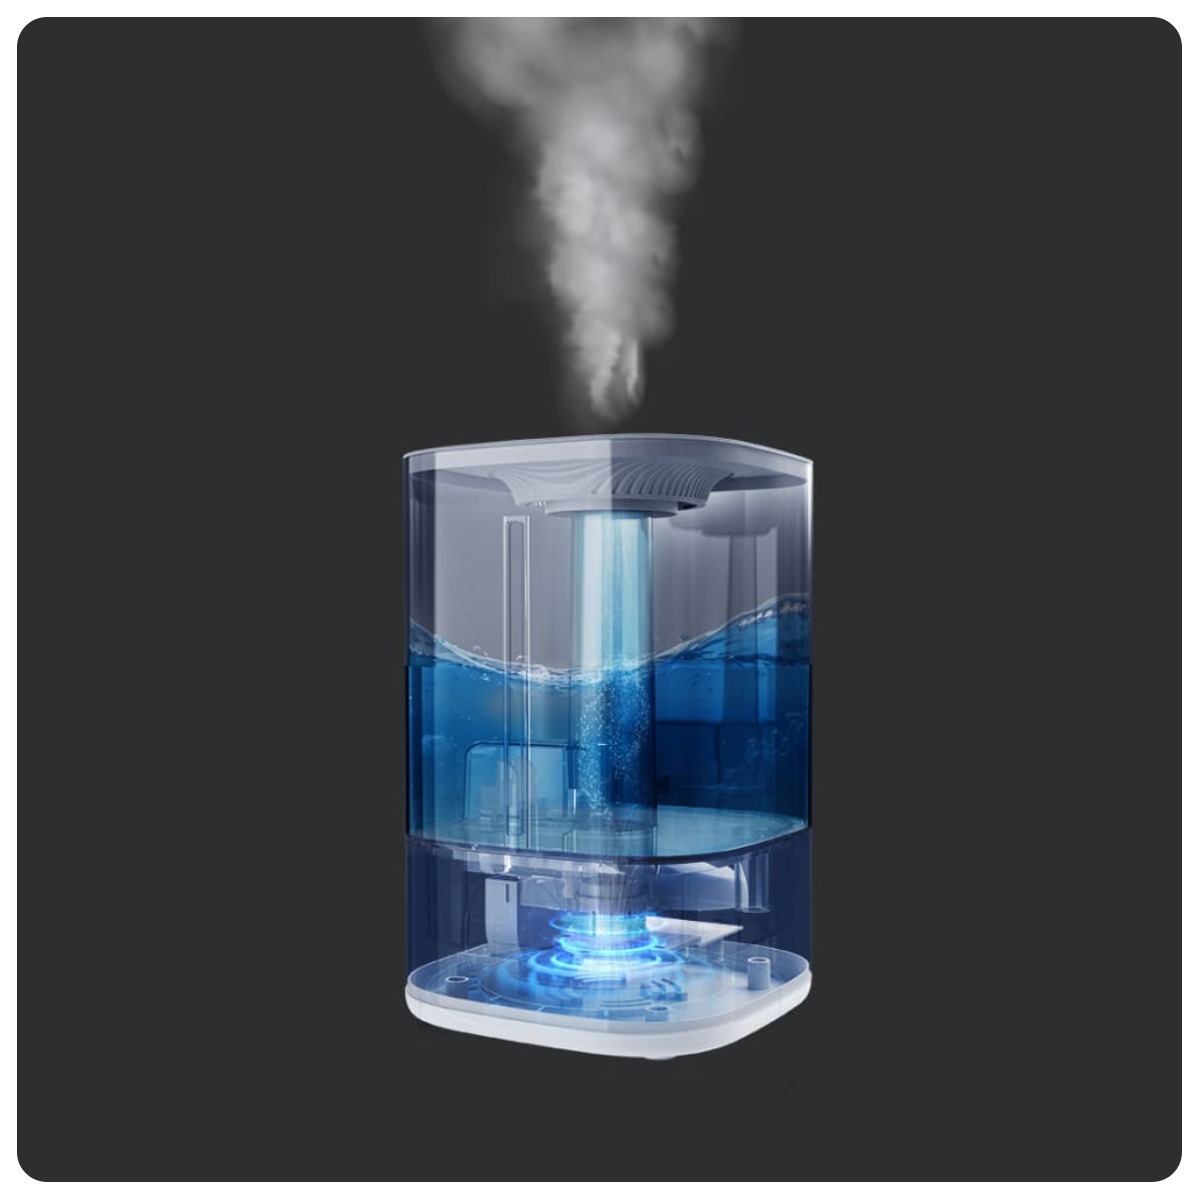 Lydsto-Humidifier-5L-F200-02